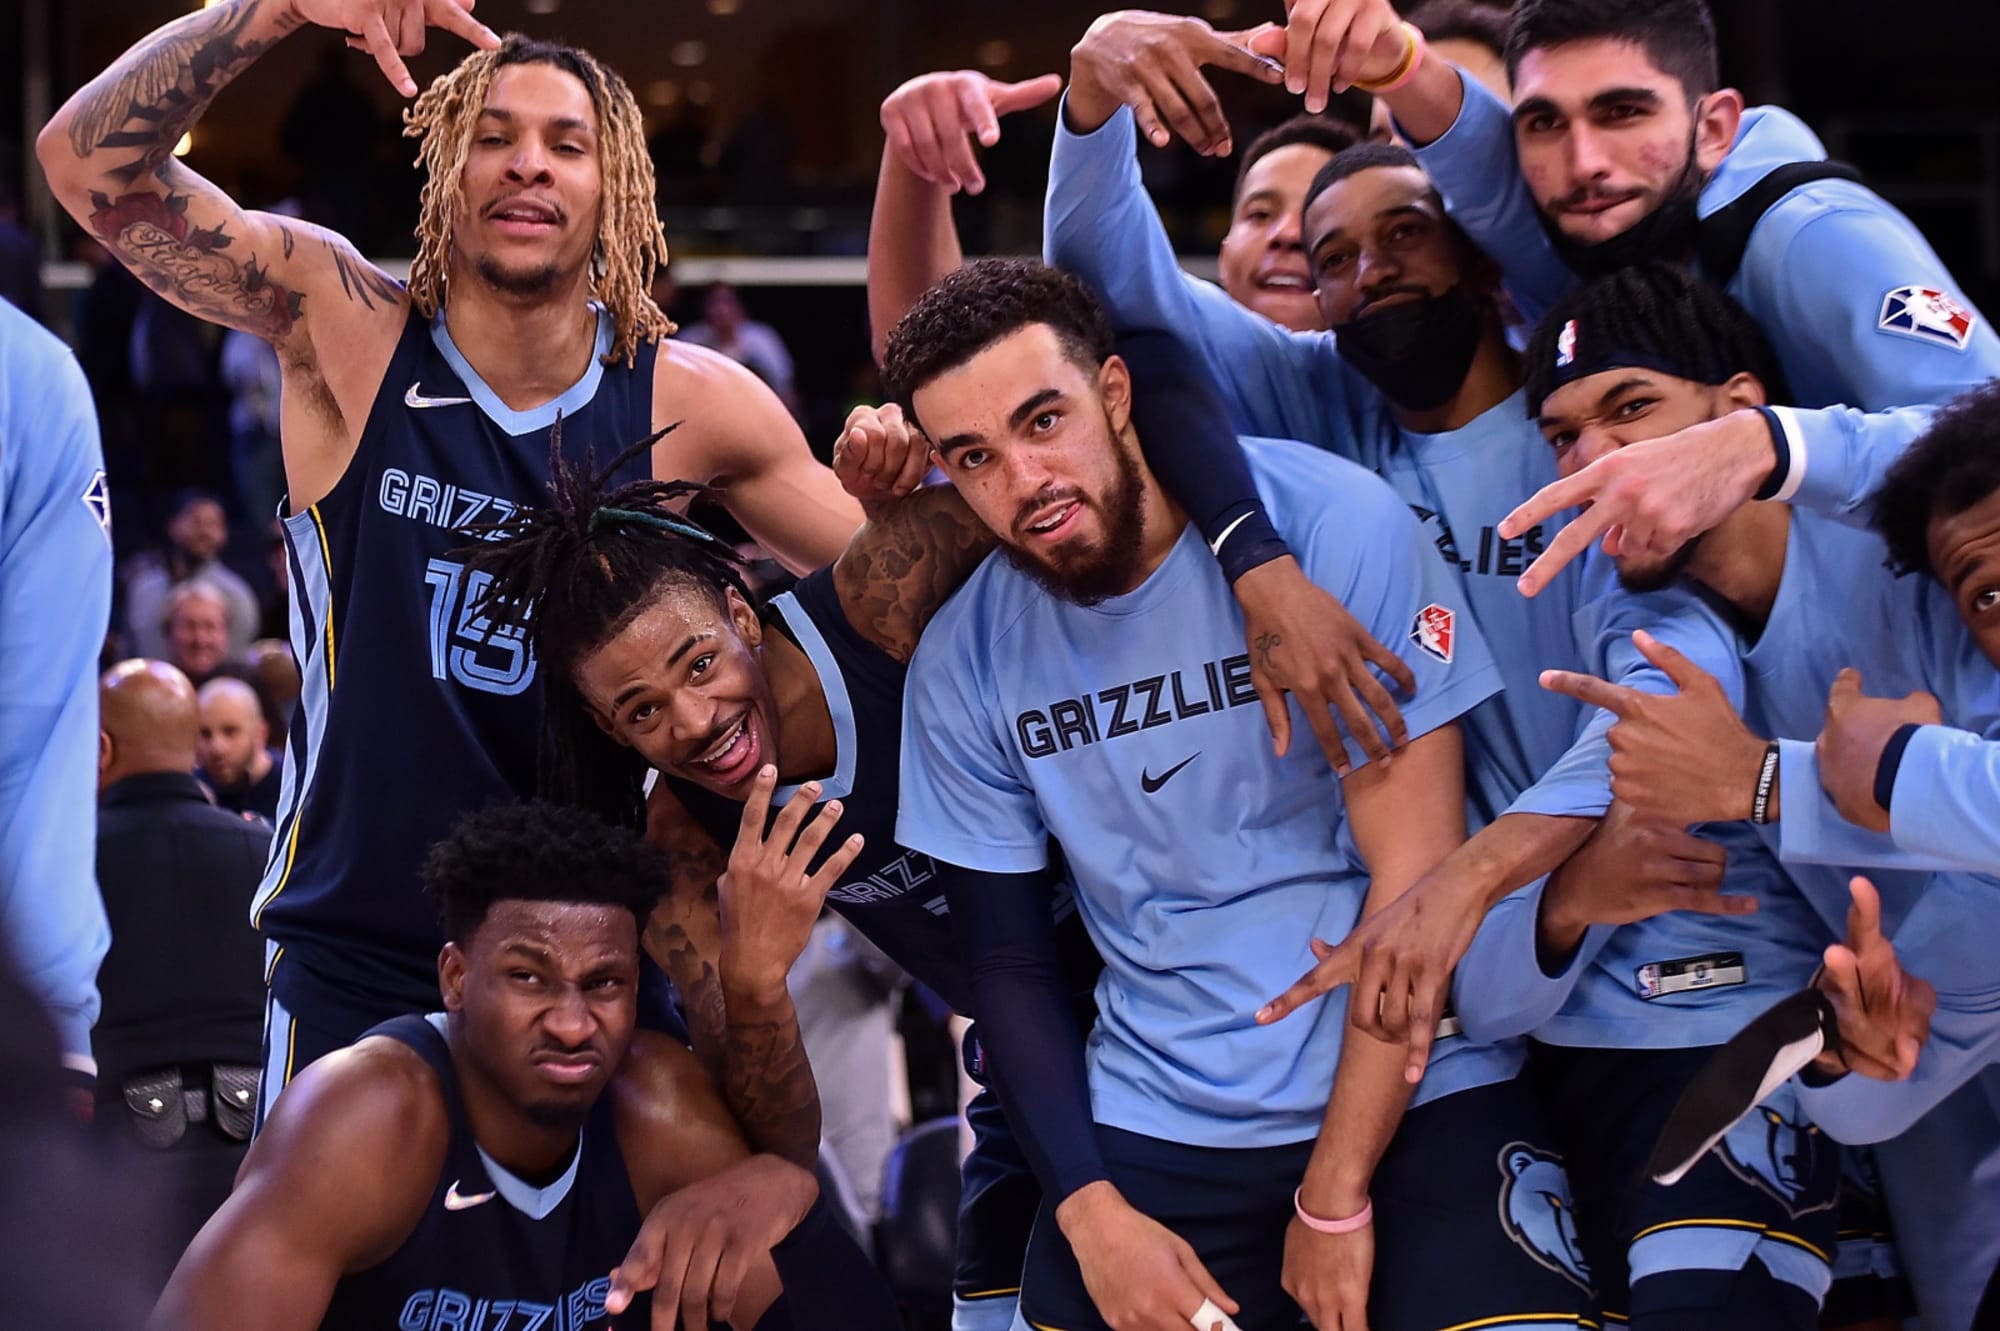 Don't question them: The Memphis Grizzlies are the real deal